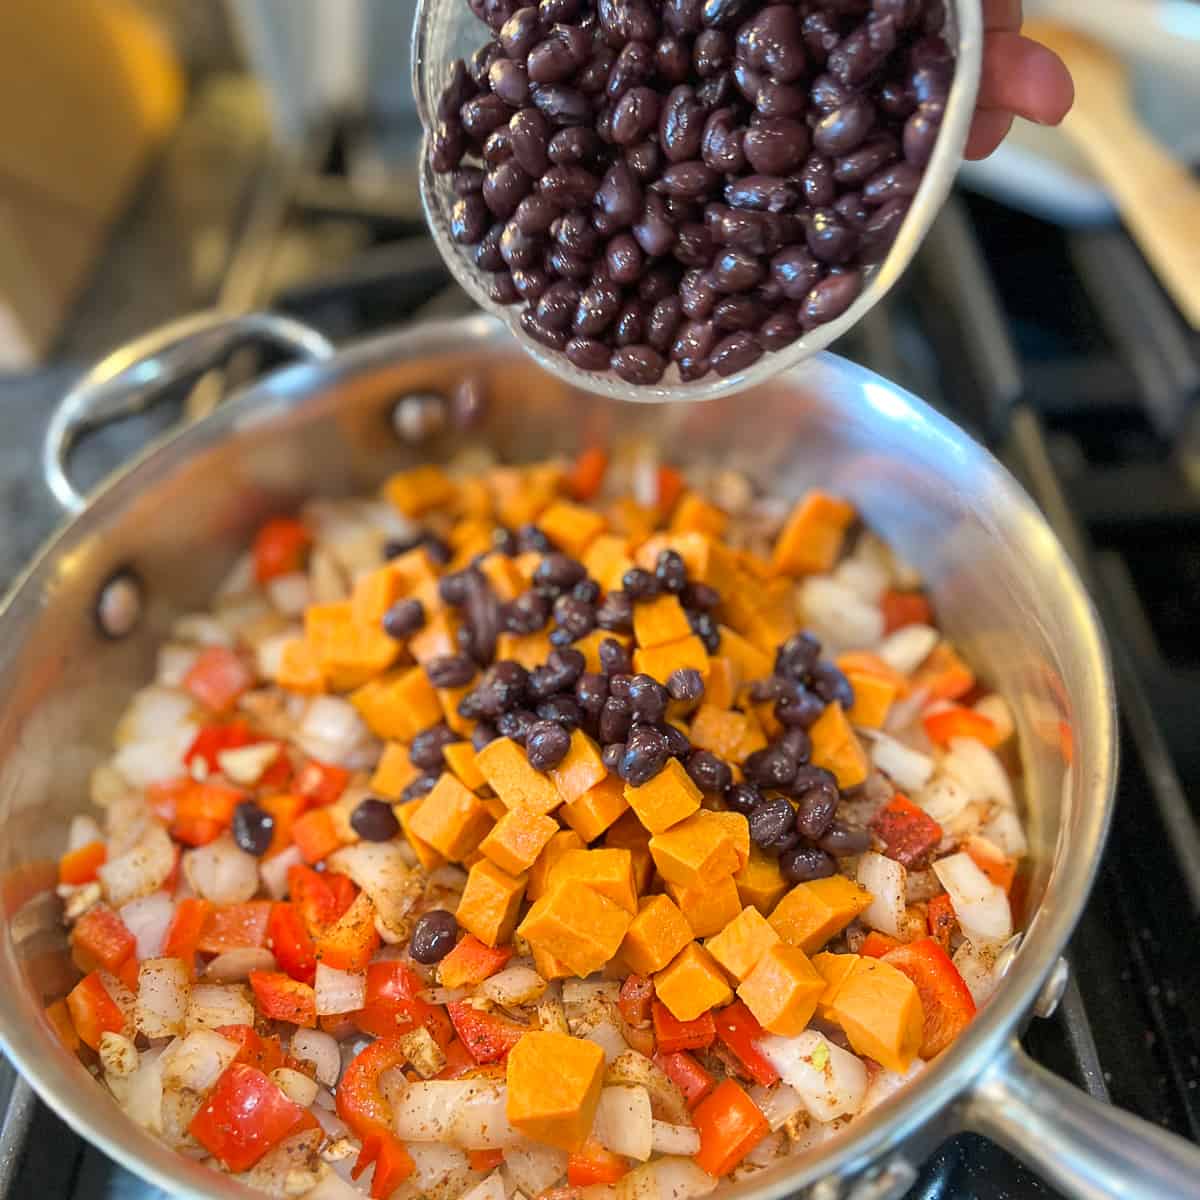 black beans and sweet potato added to the pan with other veggies